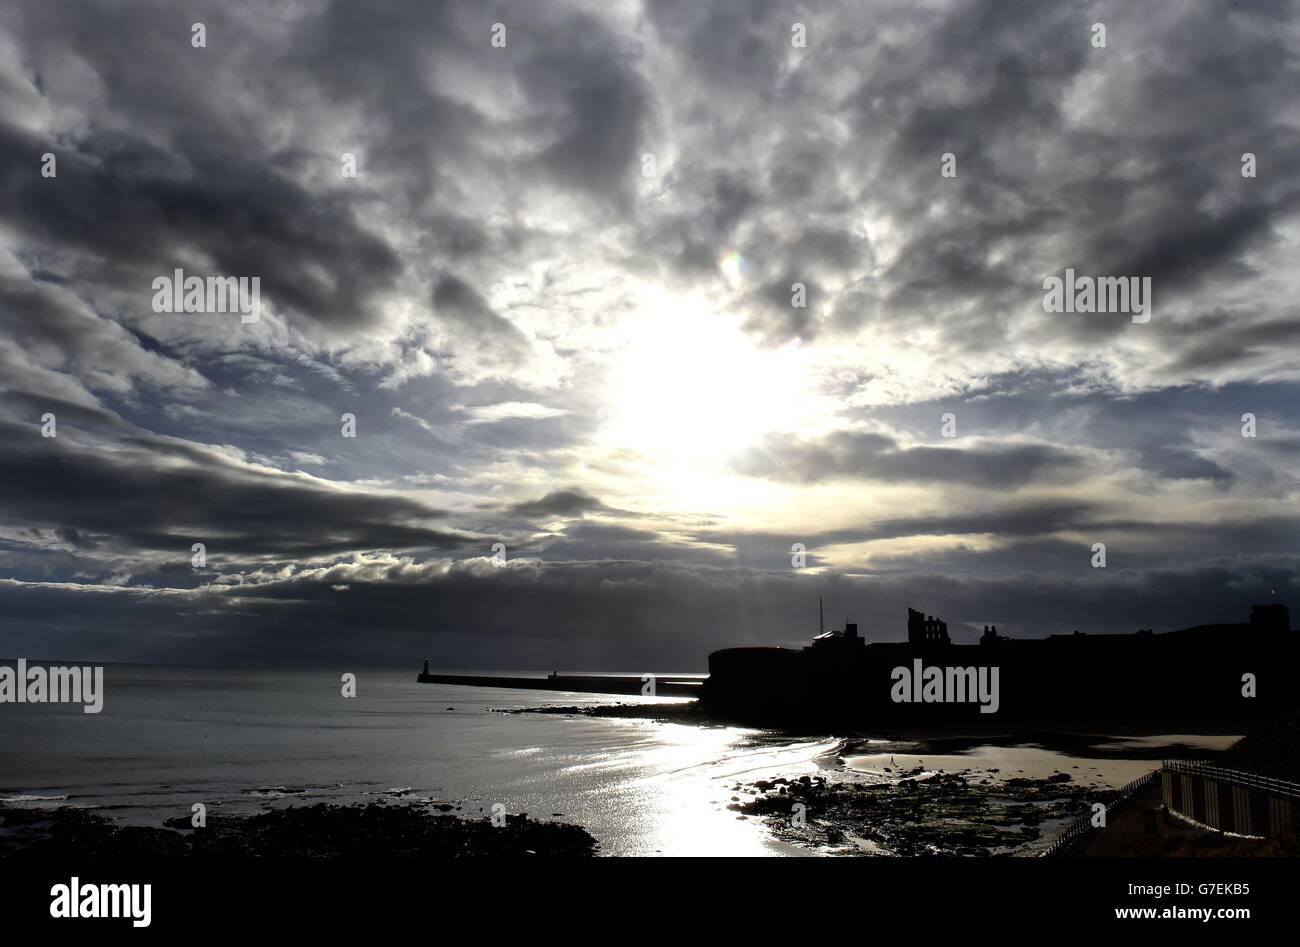 Menacing clouds hover over King Edward's Bay, near Tynemouth Priory in Northumberland. Stock Photo